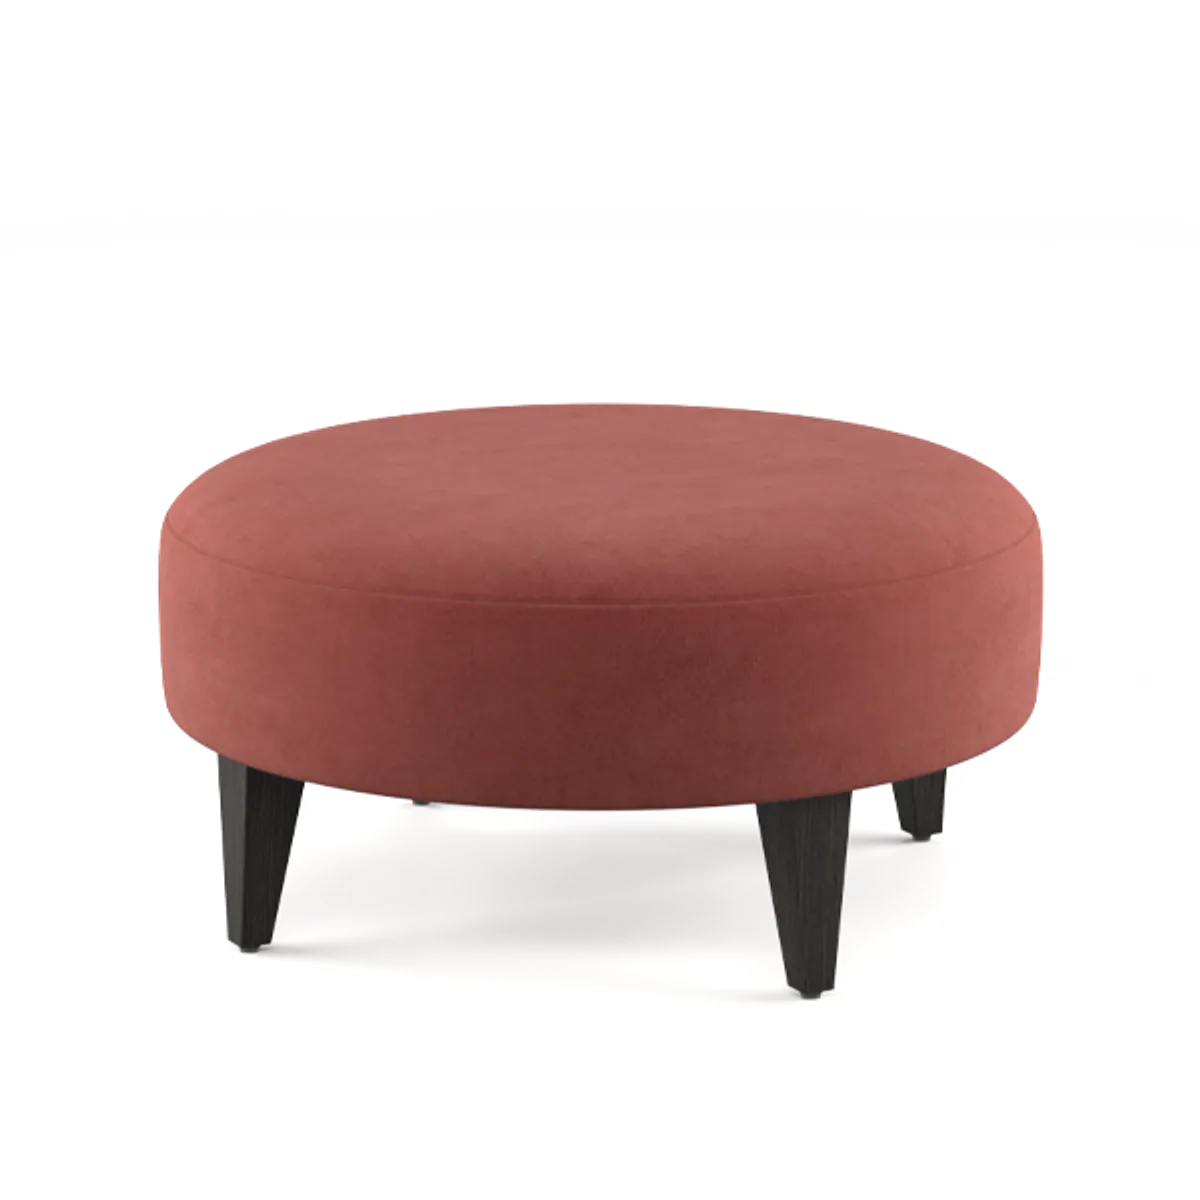 Bepsoke Pollen Round Ottoman Inside Out Contracts 2501 600